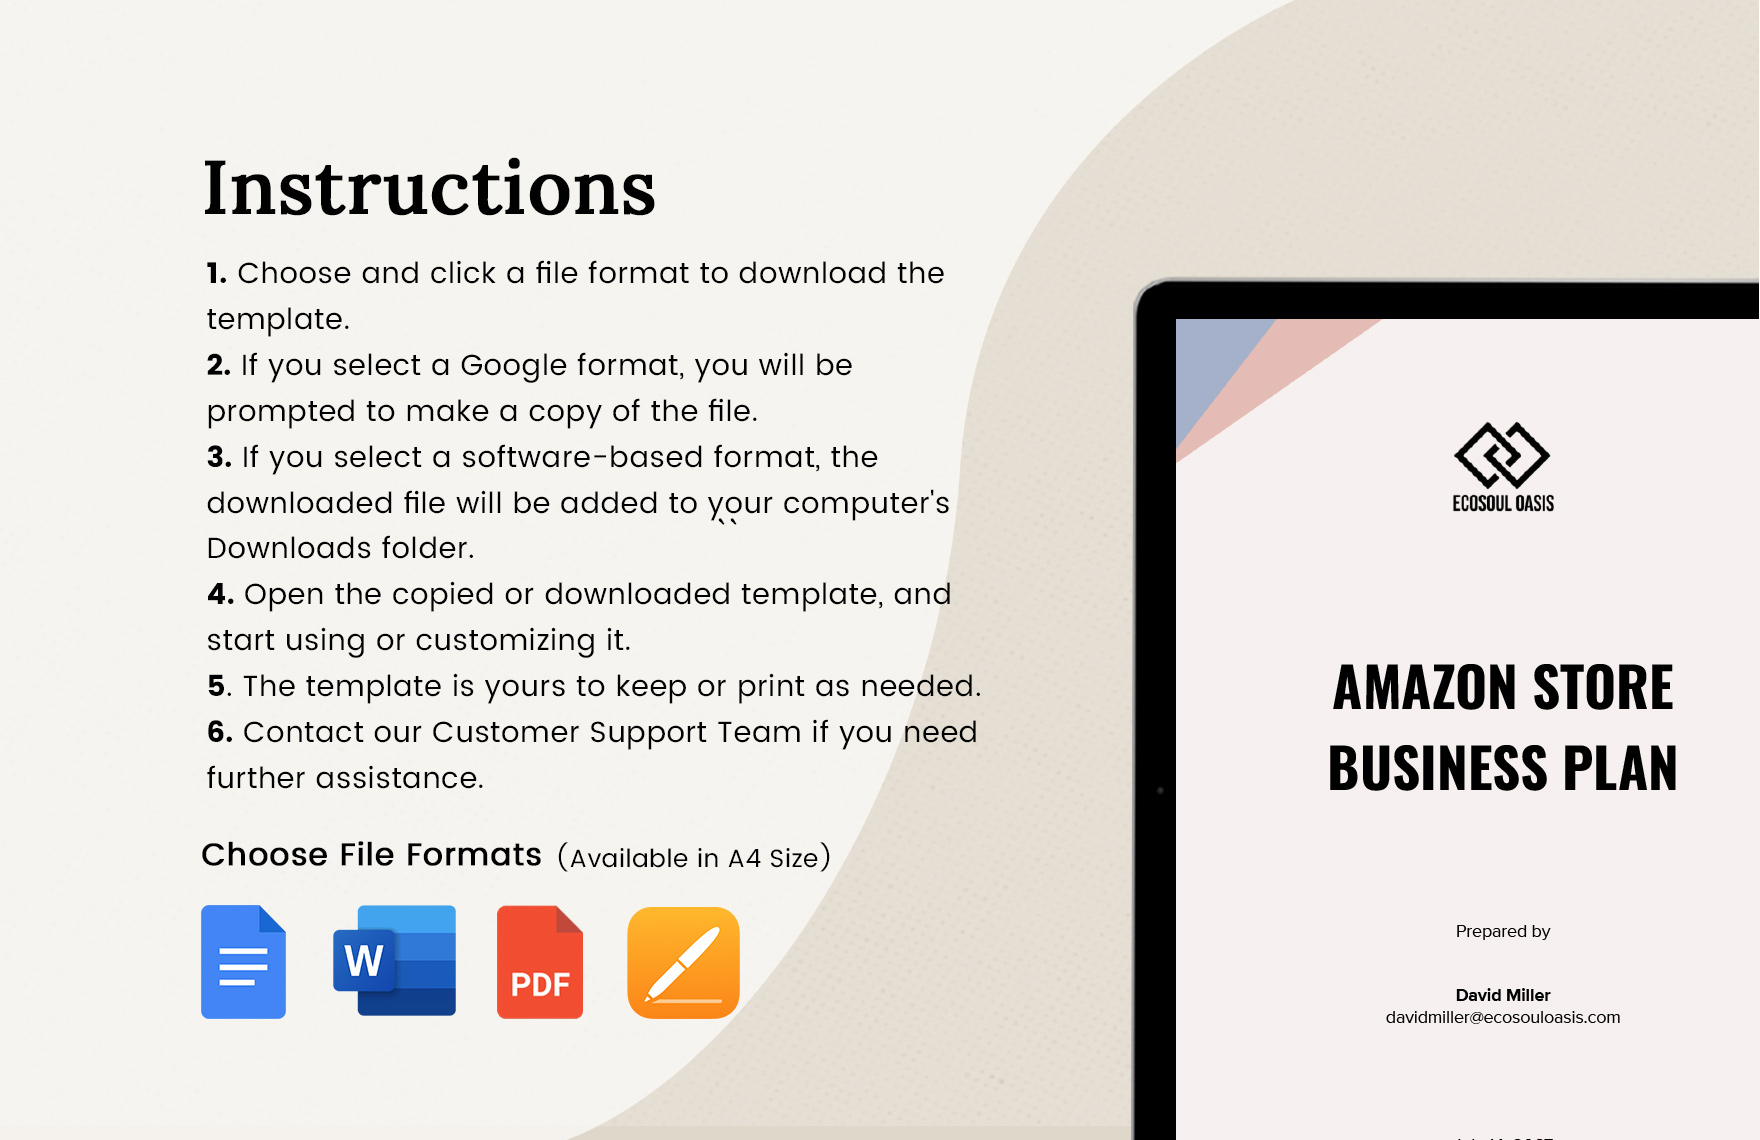 Amazon Store Business Plan Template